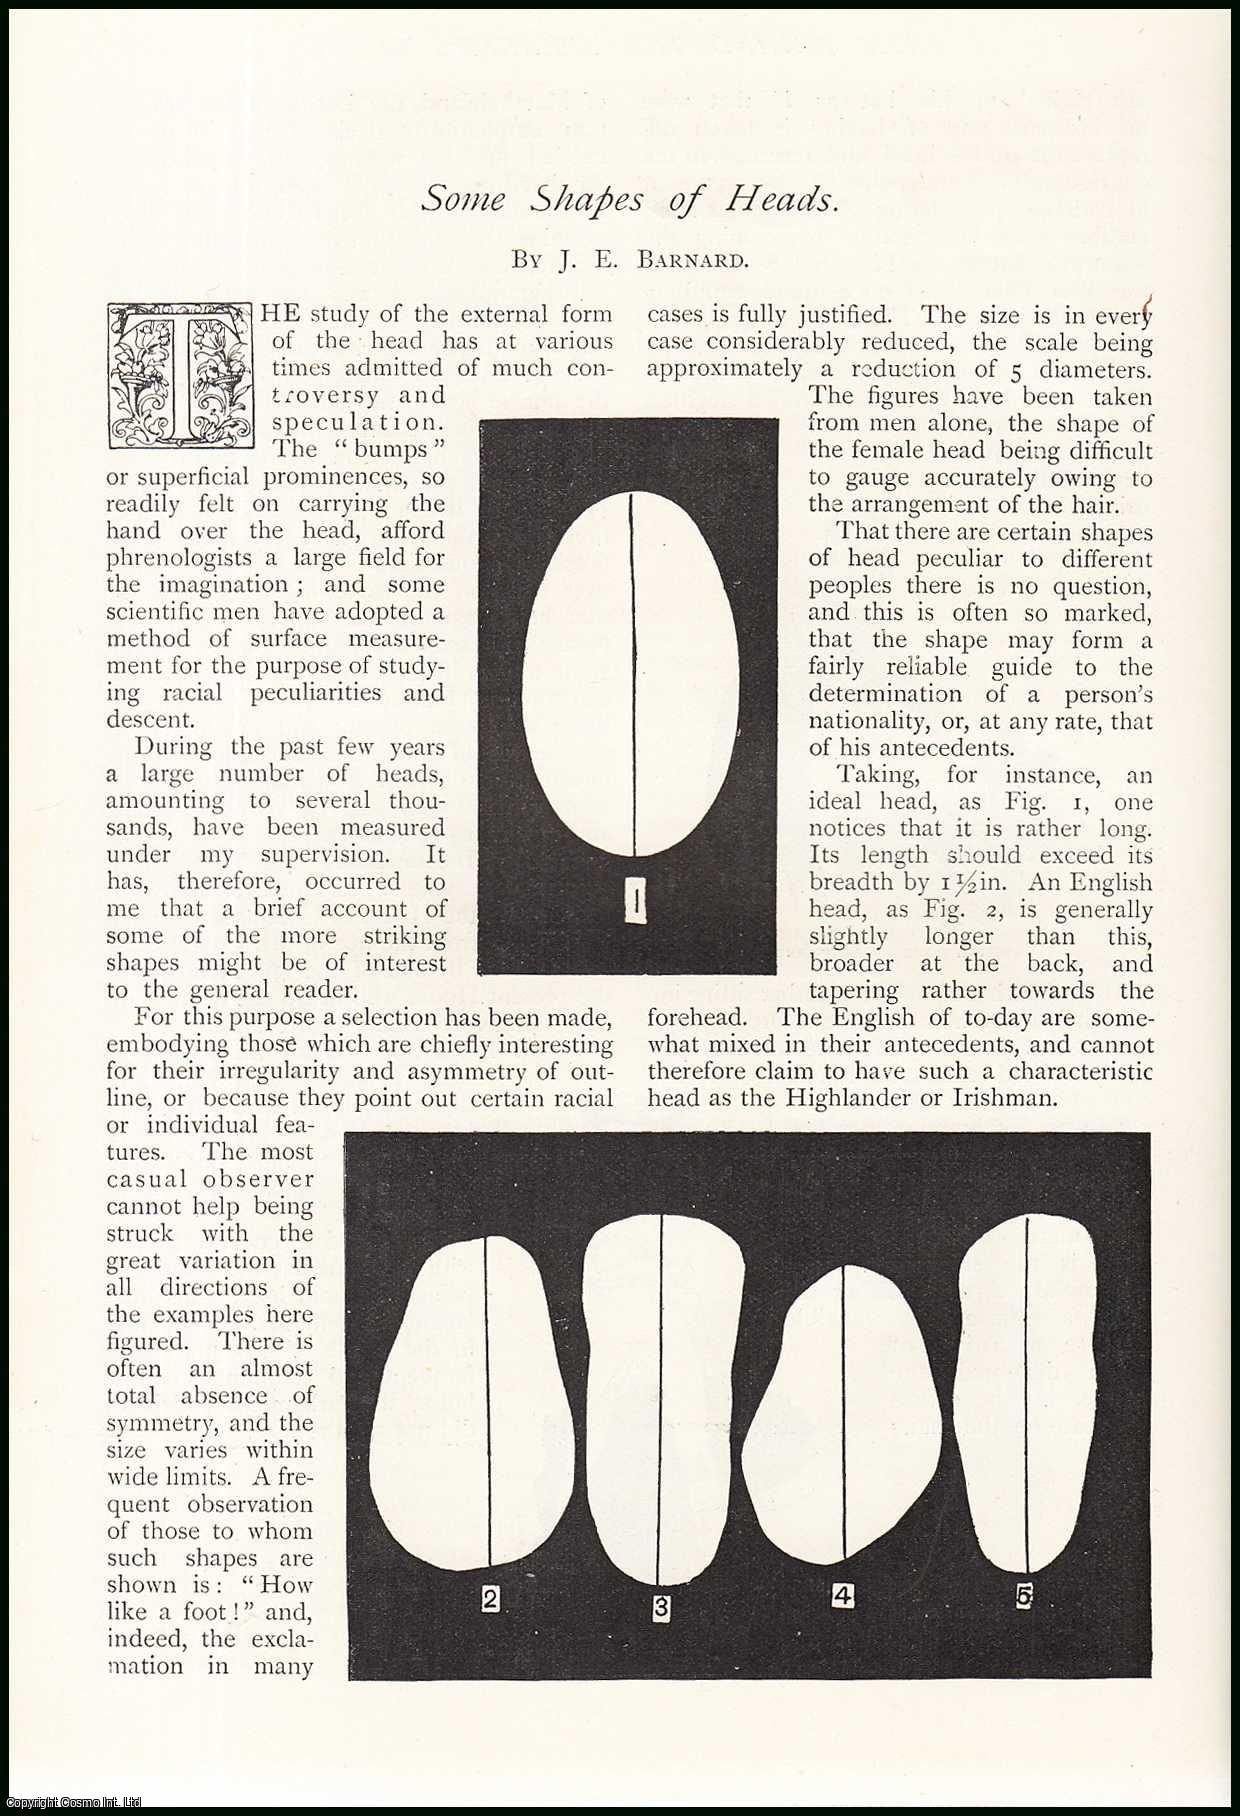 J.E. Barnard - Some Shapes of Heads : the study of the external form of the head. An uncommon original article from The Strand Magazine, 1895.